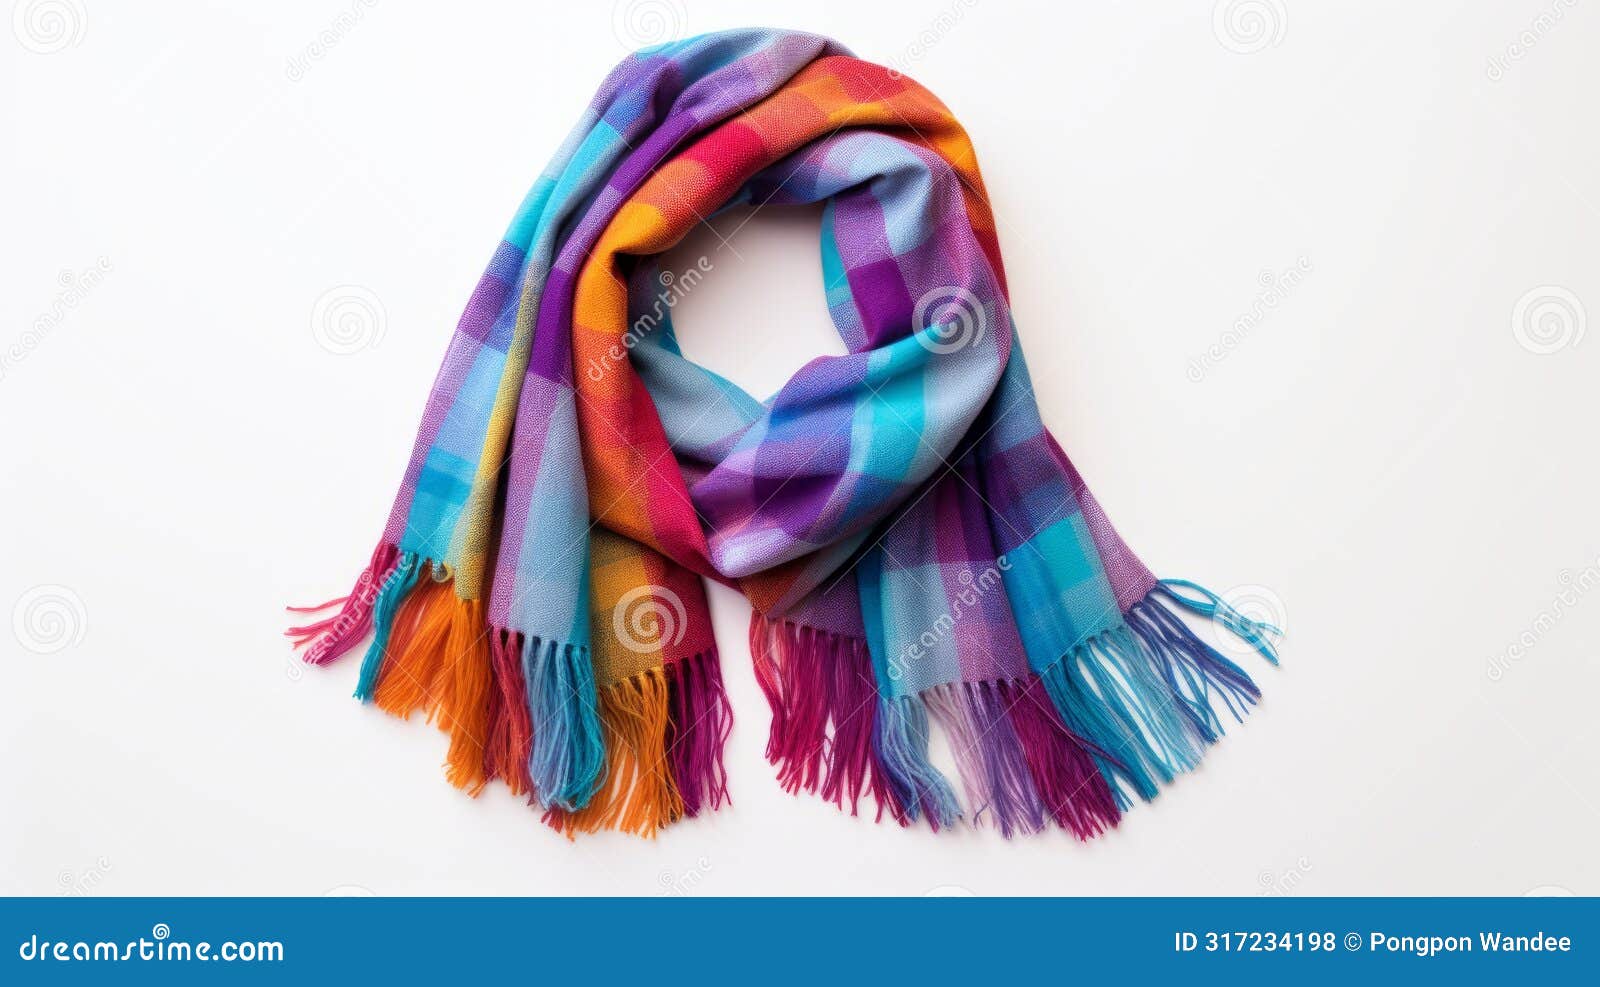 colorful, woven scarf with fringes, showcasing hues of orange, purple, blue, and green on a white background